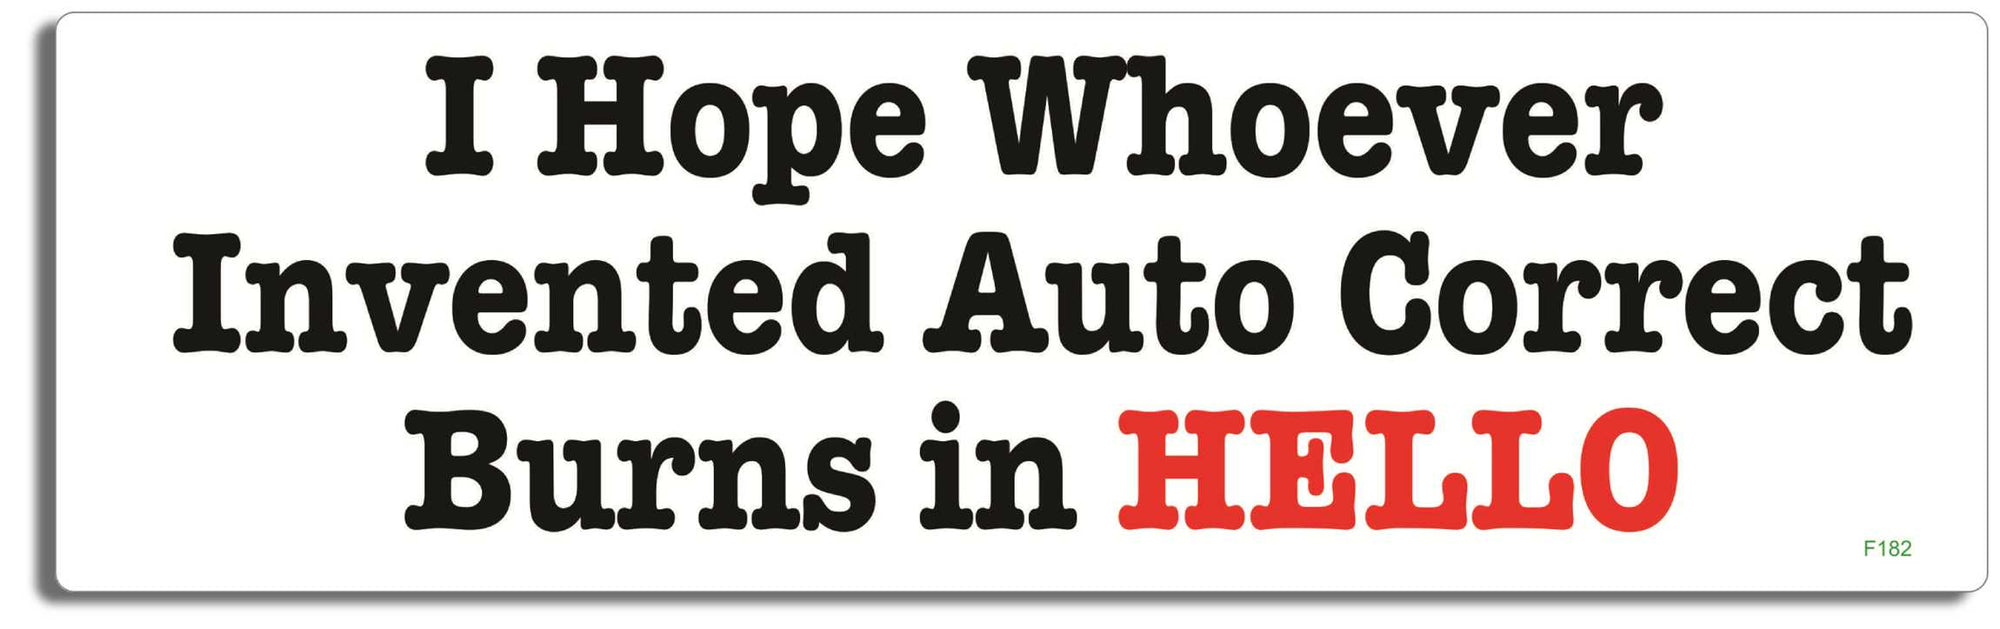 I hope whoever invented autocorrect, burns in hello -  3" x 10 -  Decal Bumper Sticker-funny Bumper Sticker Car Magnet I hope whoever invented autocorrect,-  Decal for carsgramma, typo